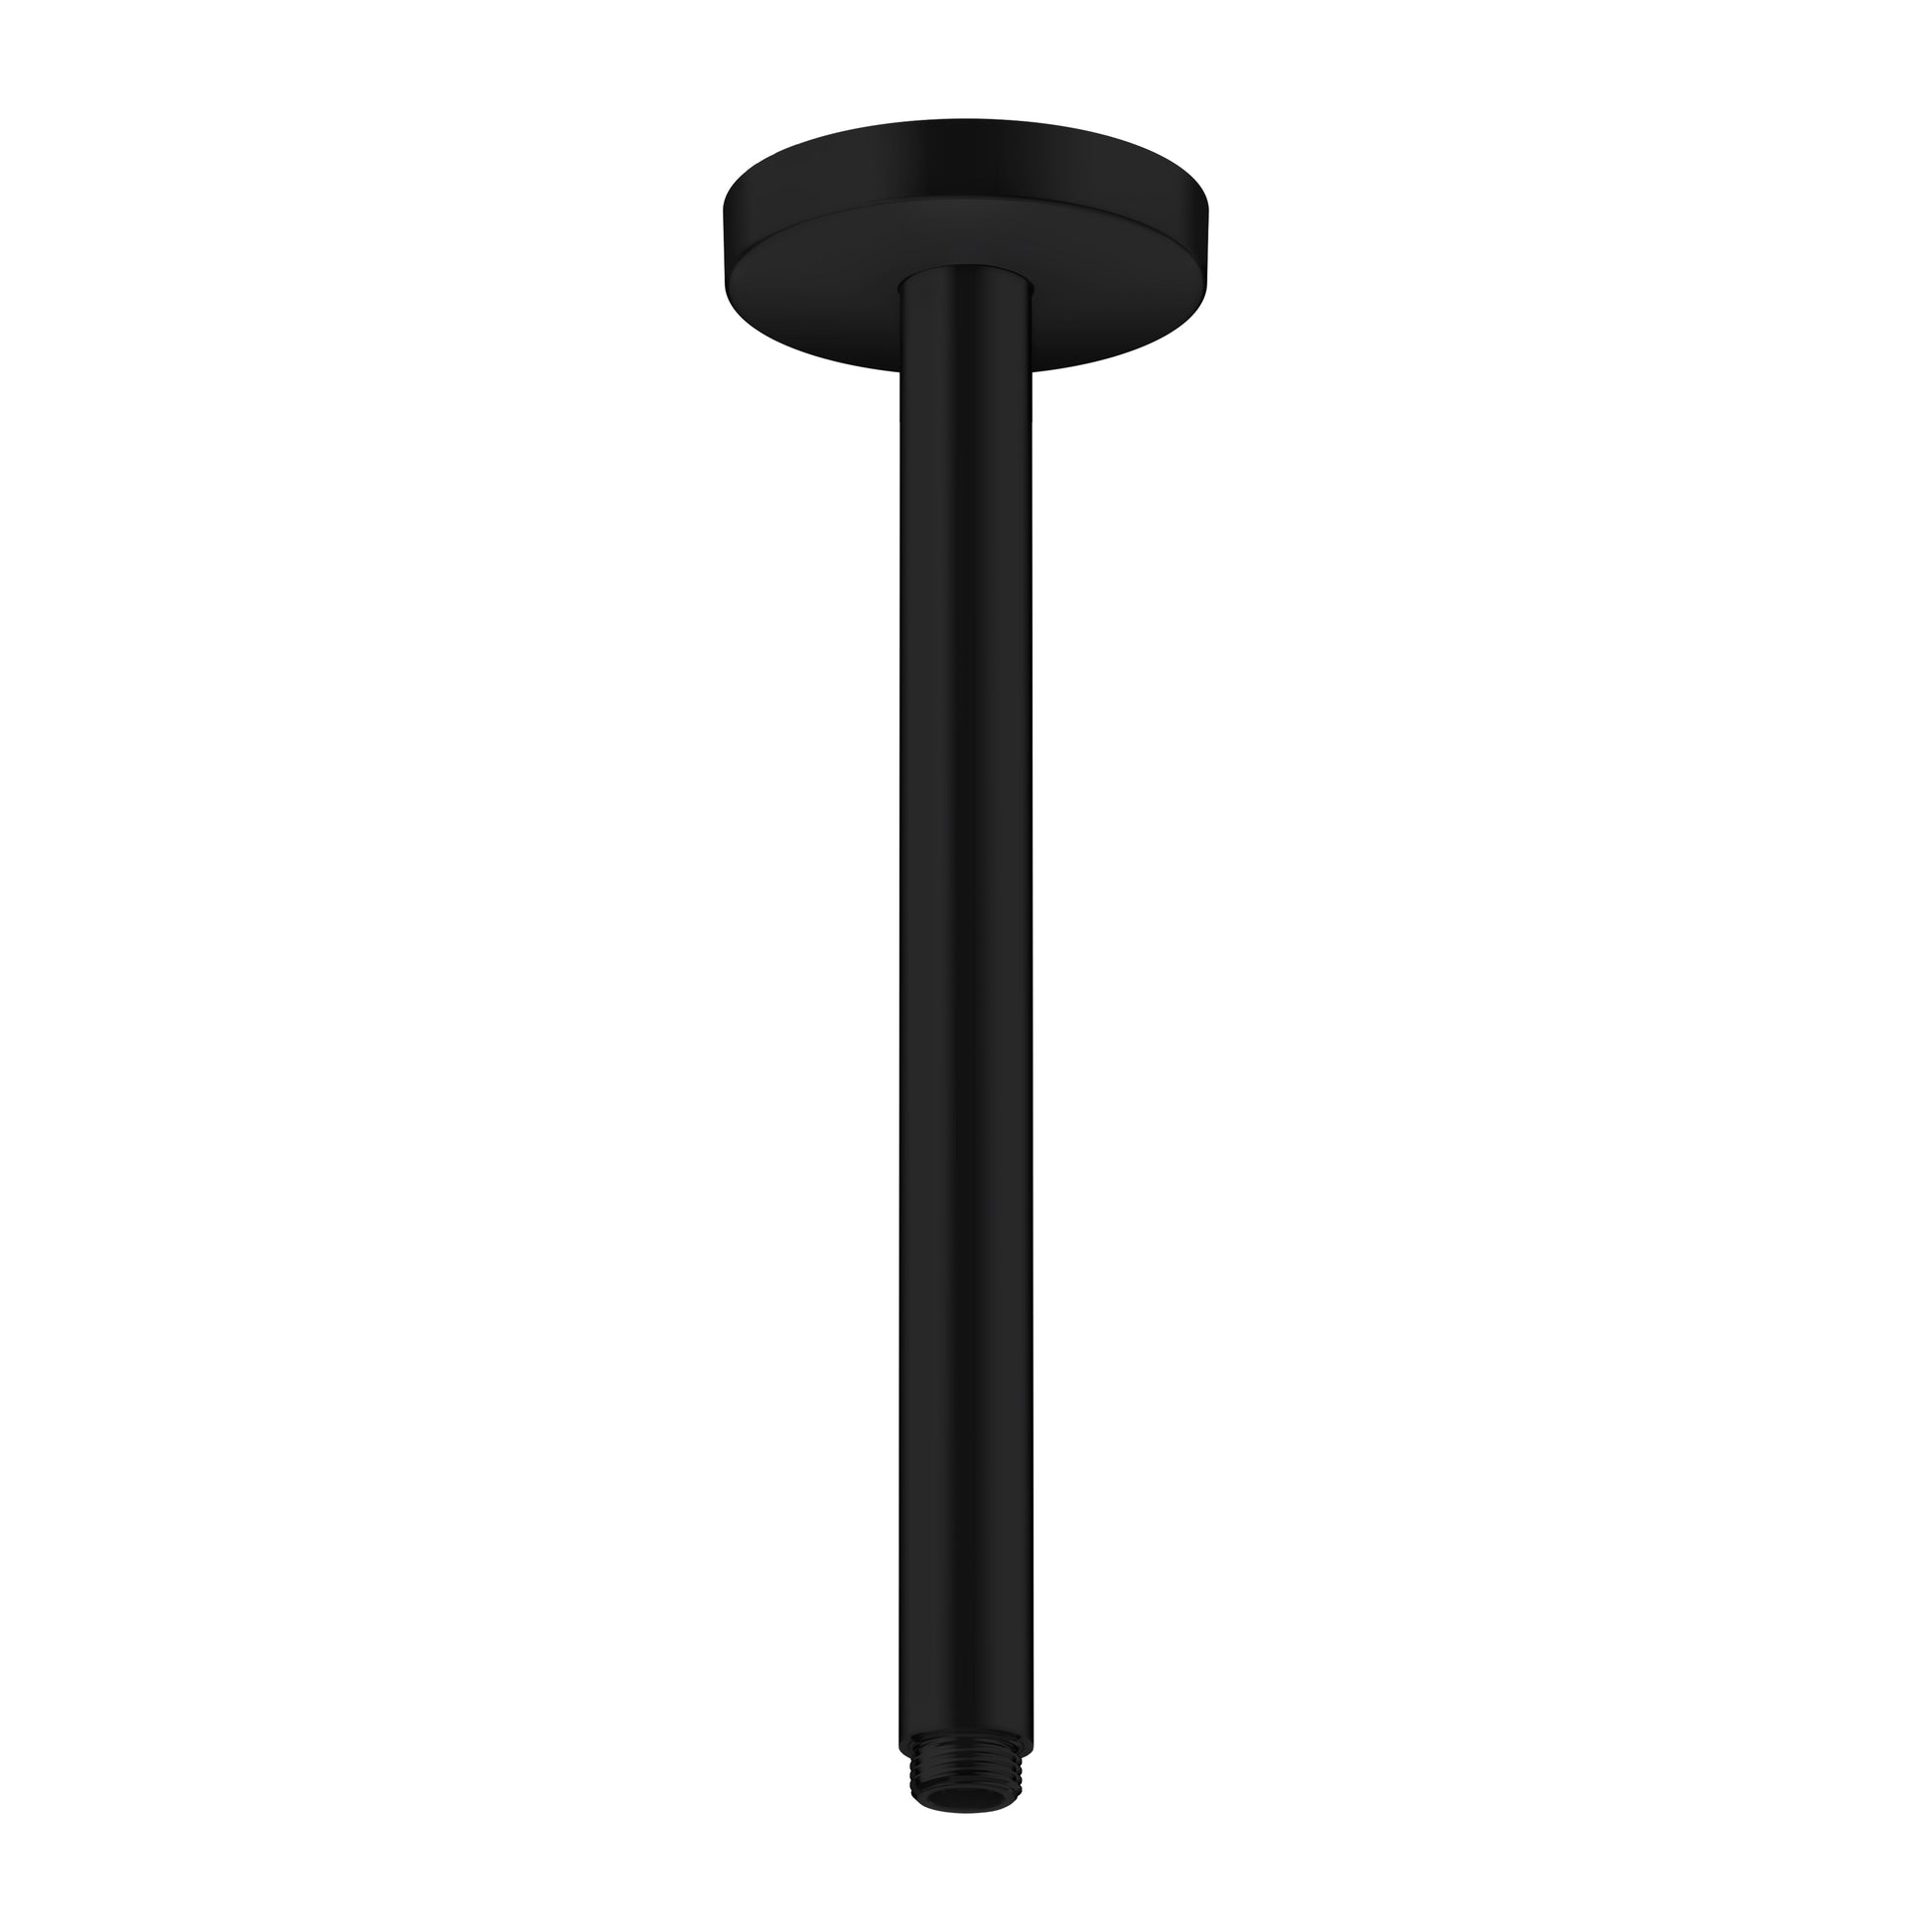 AXOR 26433671 ShowerSolutions Matte Black Extension Pipe for Ceiling Mount, 12"